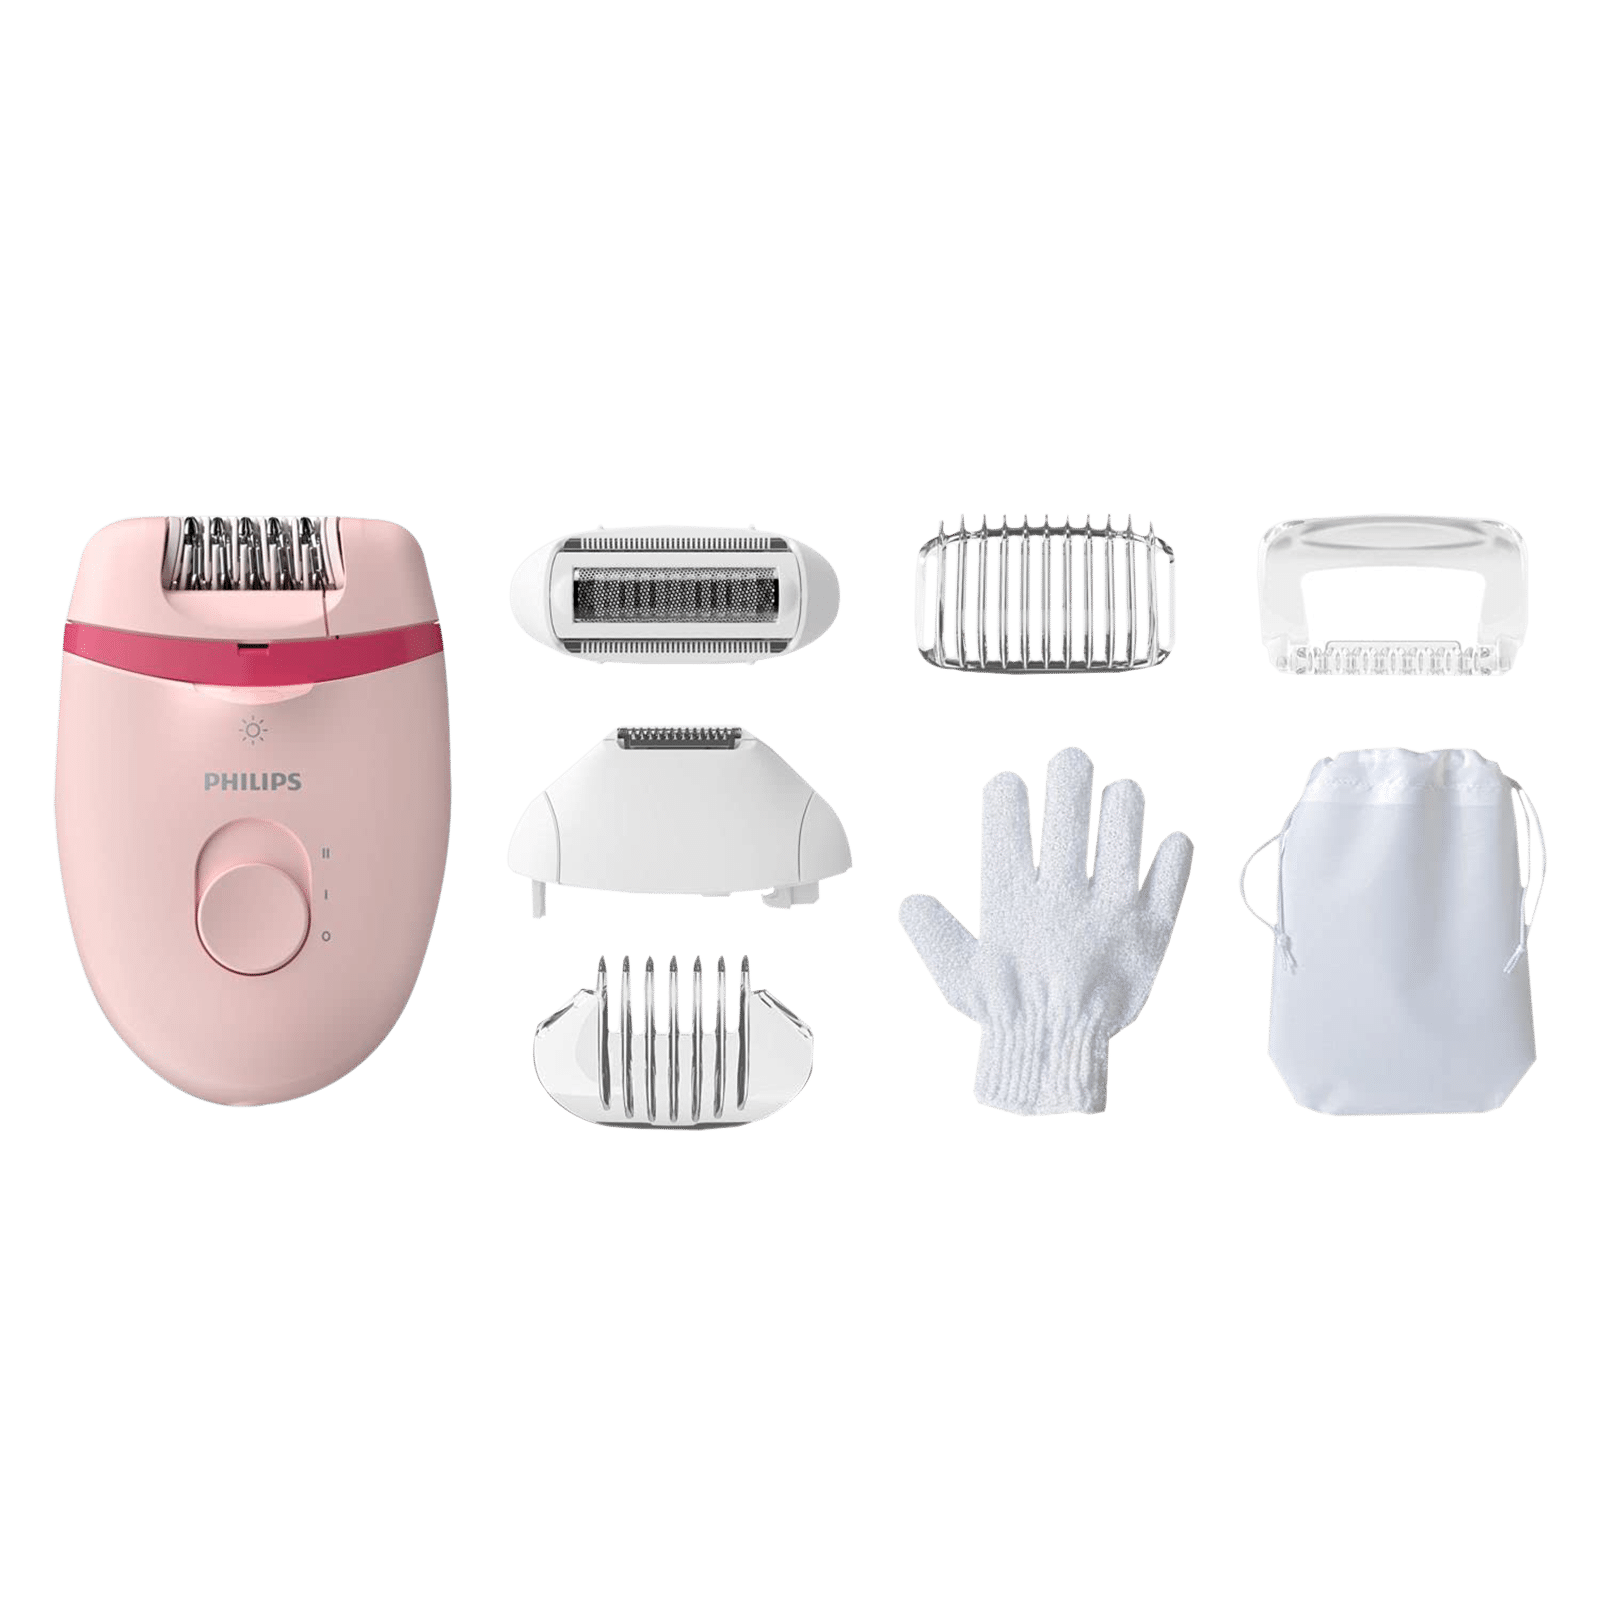 Buy PHILIPS Satinelle Essential Corded Wet & Dry Epilator for Arms, Legs & Intimate Areas with 5 Interchangeable Heads (Efficient Epilation System, Pink) Online - Croma